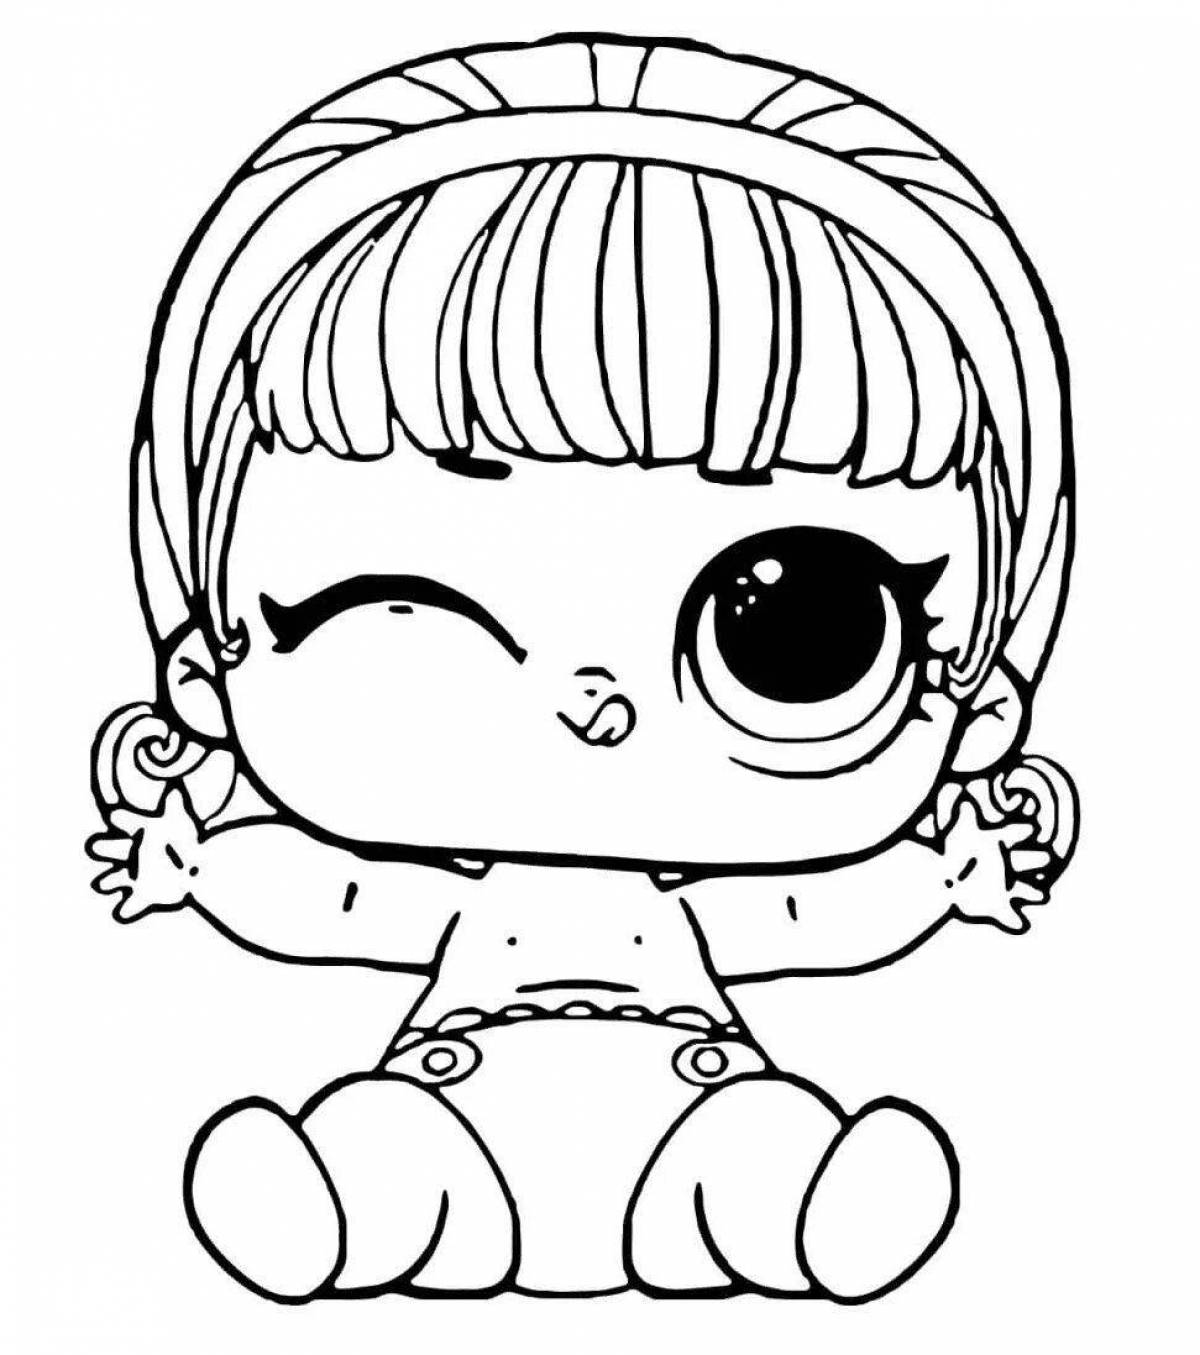 Violent doll lol little sisters coloring page